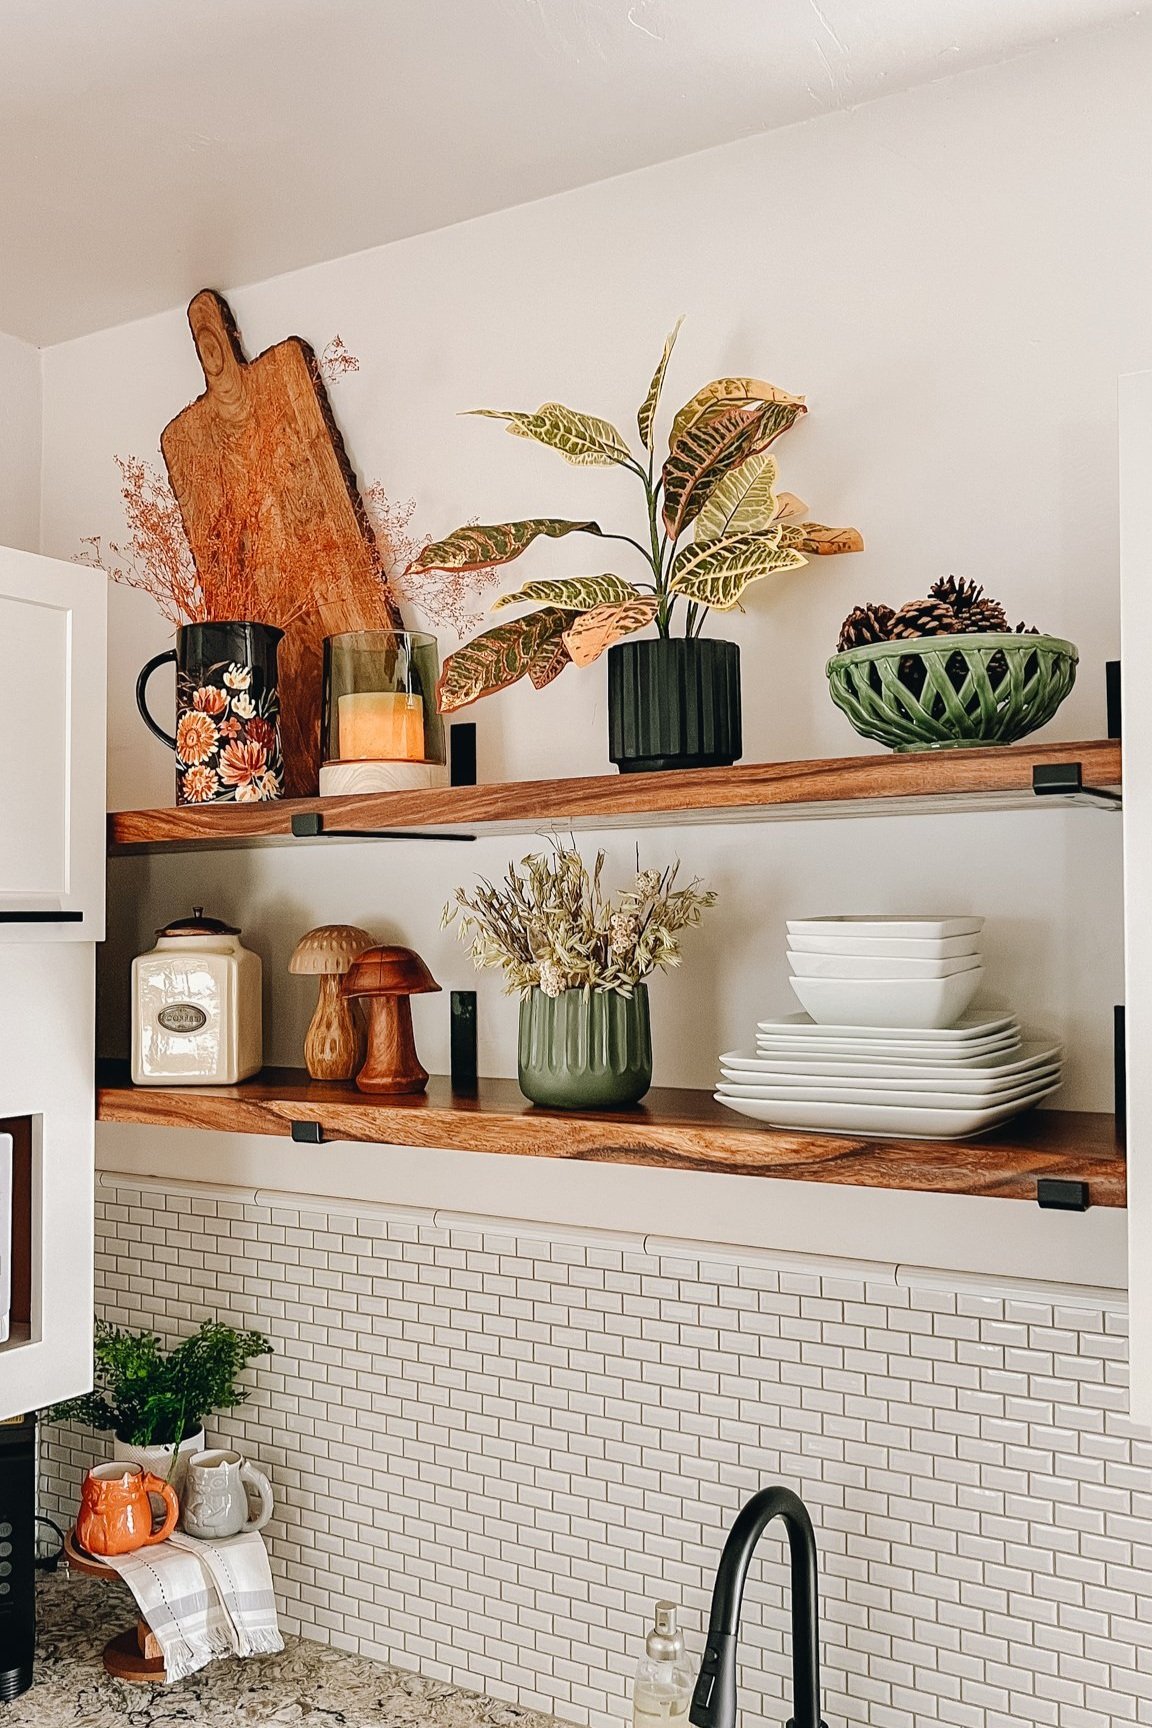 Create your own DIY floating shelves from home depot